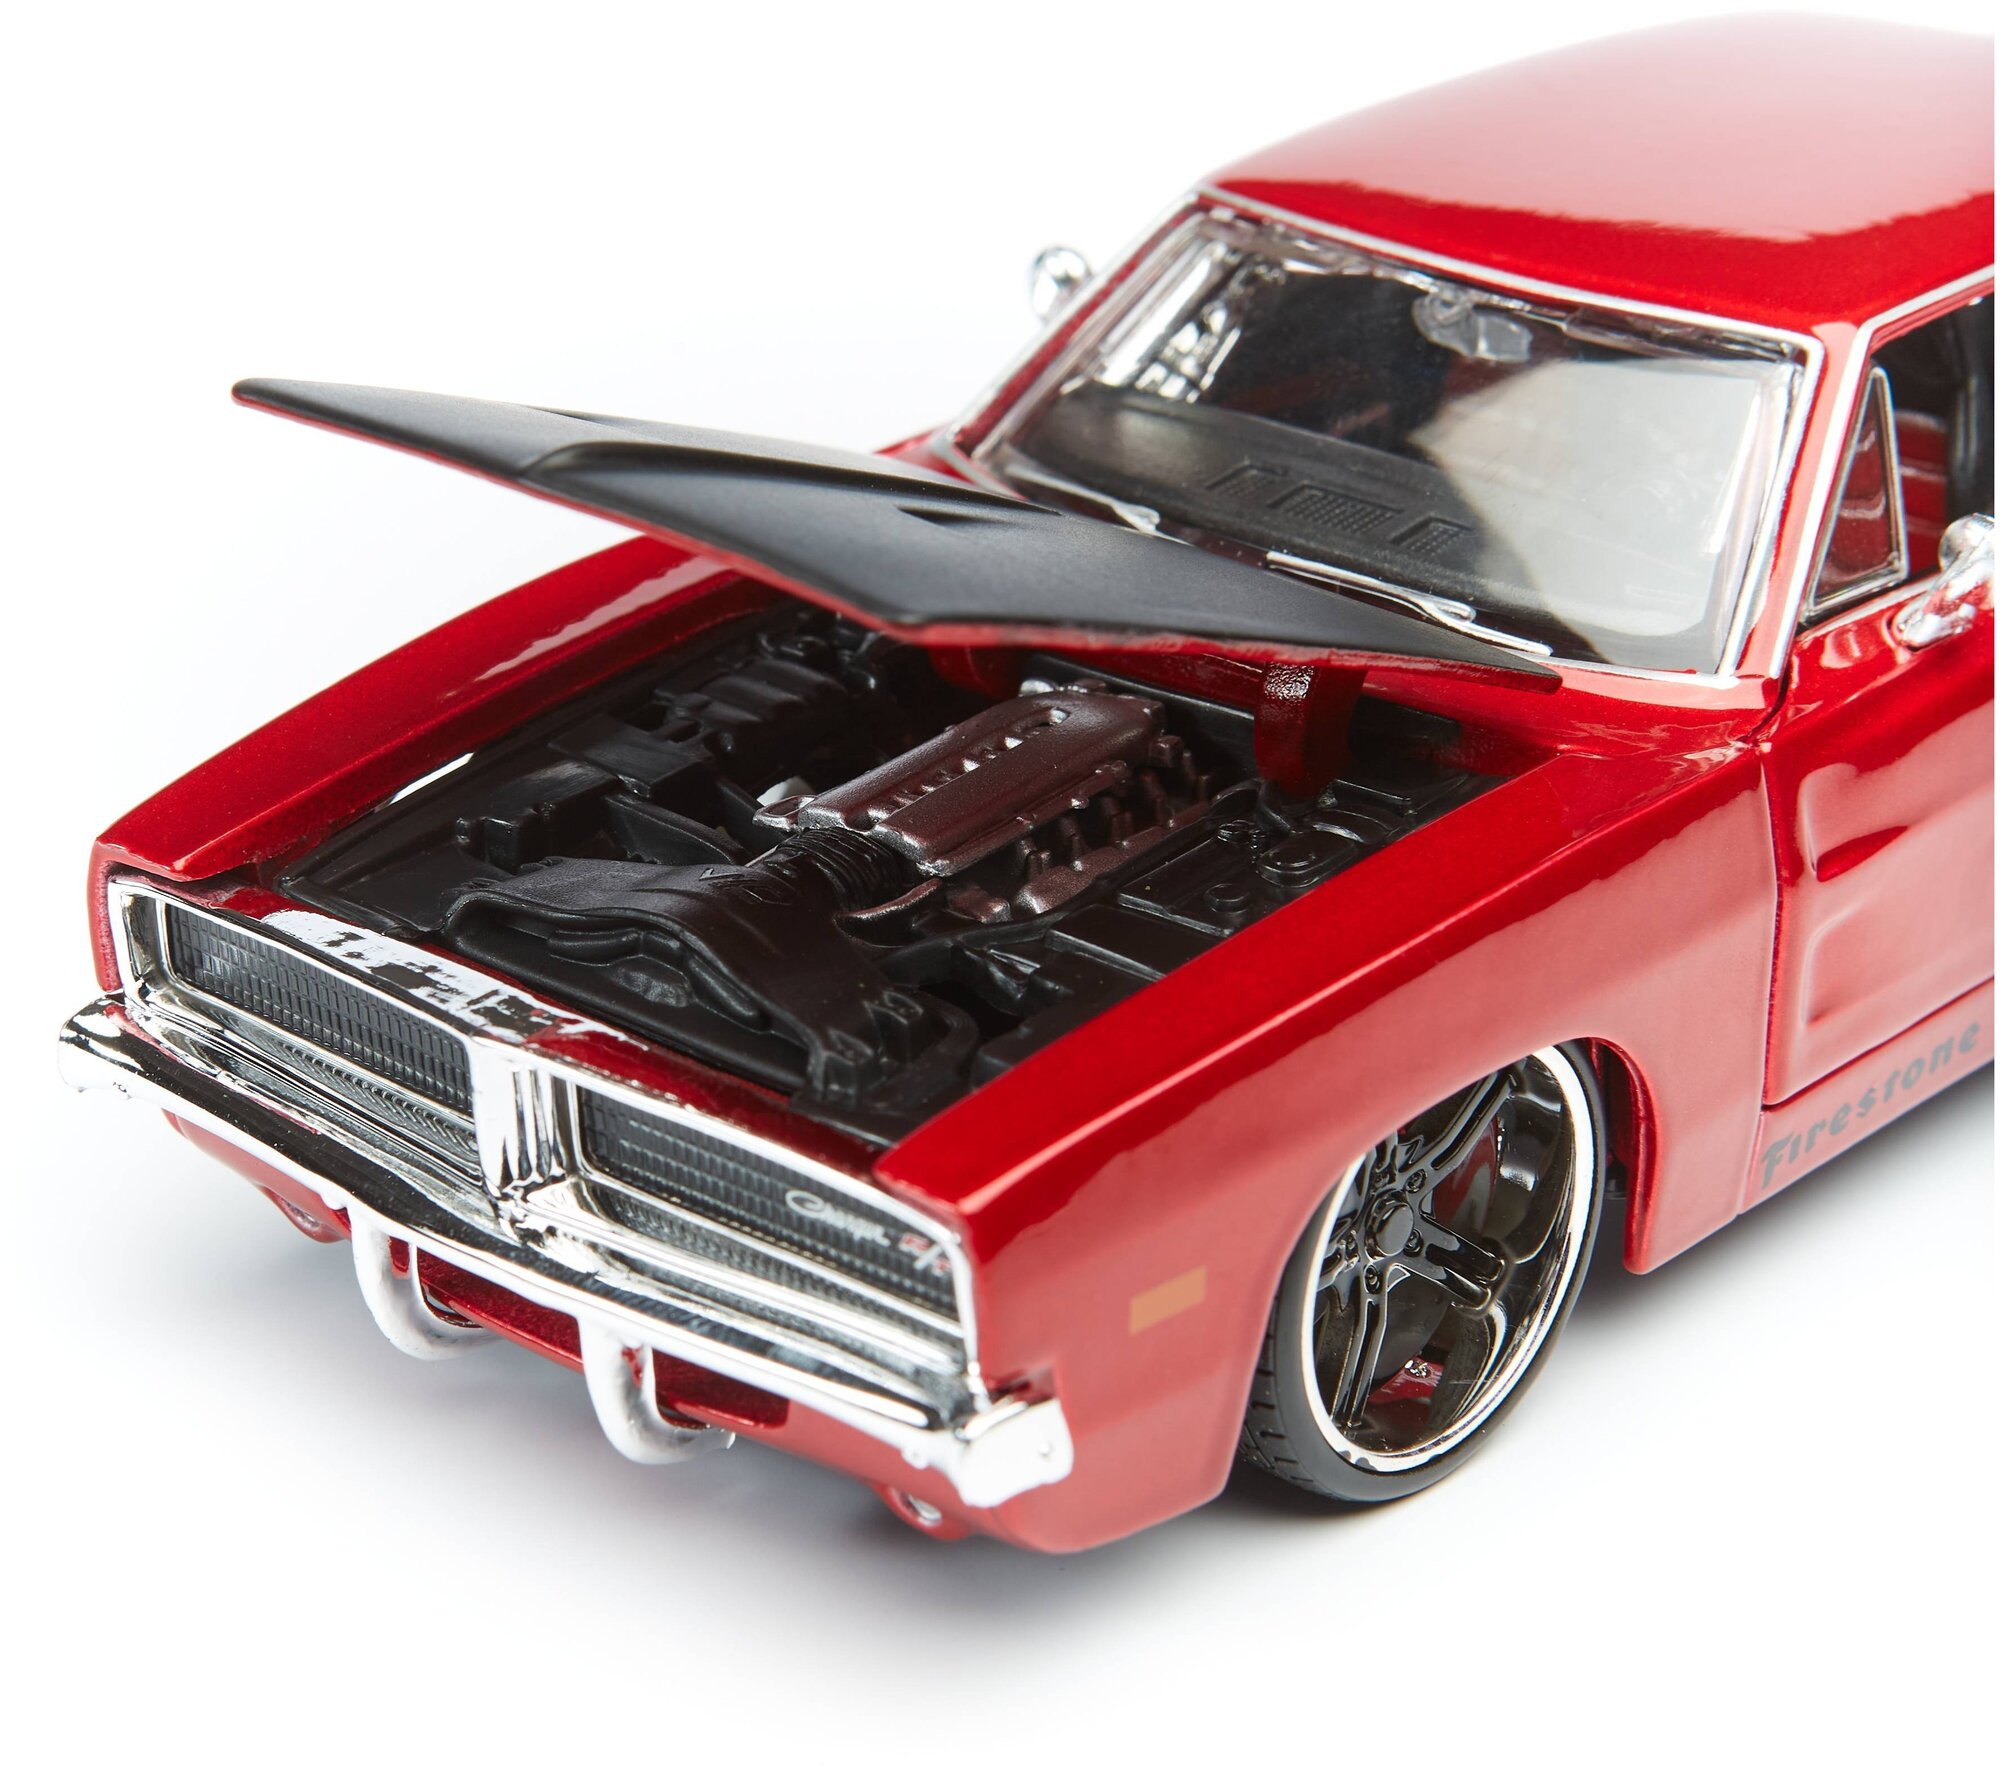 Maisto Машинка 1:24 "Design Classic Muscle - 1969 Dodge Charger R/T", красная - фото №5